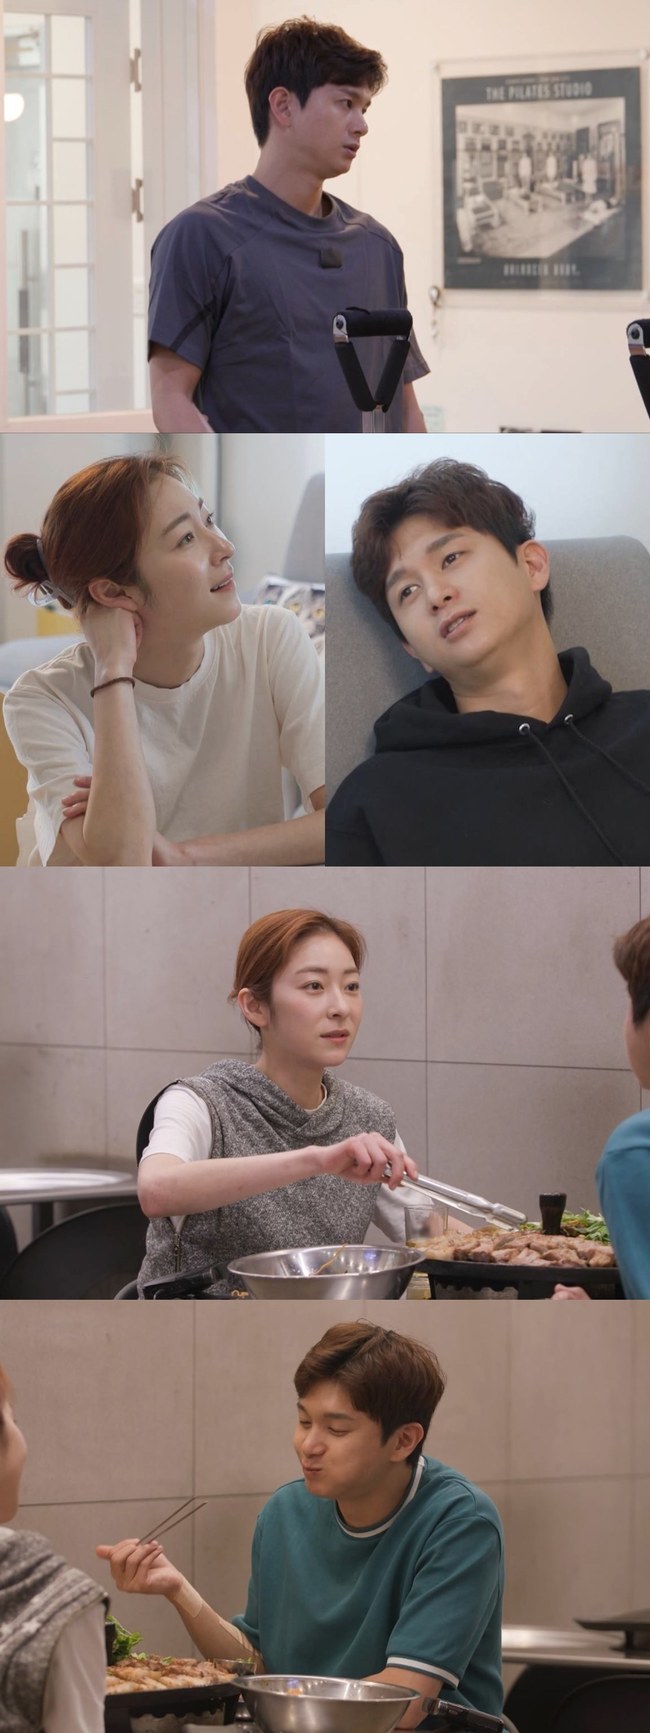 On May 15, SBS Same Bed, Different Dreams 2 Season 2 - You Are My Destiny depicts the daily life of Vallejo Reno park jong-seok and his wife Wang Ji-won who sick leave.National Vallejo dancer Park jong-seok caught an unusual airflow.Wang Ji-won said, One day I screamed and sat down. He revealed the current state of park jong-seok using his first sick leave in eight years.Park jong-seok, who usually showed off his swan-like appearance, visited the questioning place, not the Vallejo Dan practice room.I can not hide my sadness in the studio with the wailing sound, and I wonder what happened to park jong-seok.In addition, Wang Ji-won, park jong-seok fought an injury saga battle.In the lovely mix of park jong-seok, Vallejo senior Wang Ji-won went to the cold pack. Wang Ji-won said, I have broken my peach bones.), And park jong-seok responded by saying that his toes were all bent, and that the studio MCs could not keep an eye on Couples constant injuries Battle.On the other hand, the chief dancer park jong-seok was the top model in Mukbang ⁇  for  ⁇ 27.Park jong-seok, who had been a gourmand in the previous broadcast, expressed his resolve to say that  ⁇  Mukbang Top Model was a lifelong bucket list.After that, he volunteered for thorough training for success, and Kang Jae-joon, who was watching his national treasury, admired Mukbang.Indeed, park jong-seok is interested in whether he will be able to win the prize money of millions of won by succeeding in Mukbang for 27 people within the time limit.